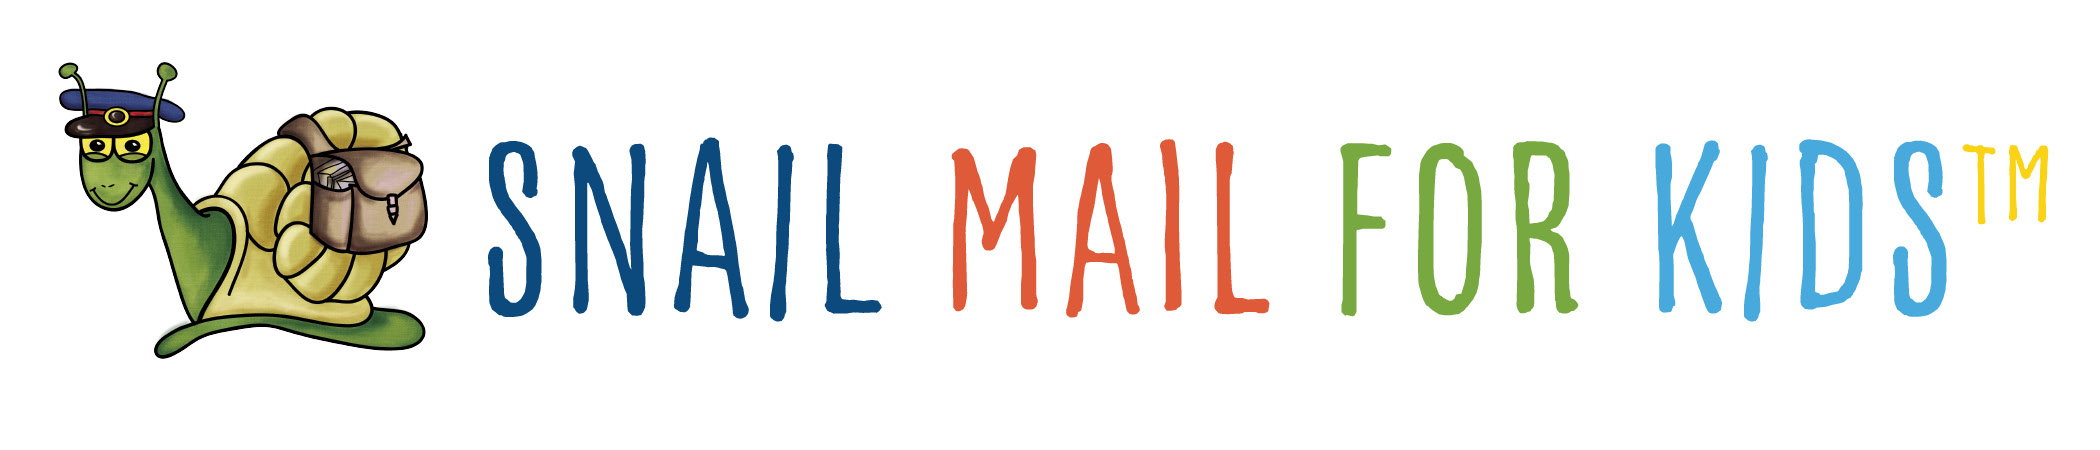 Snail Mail for Kids